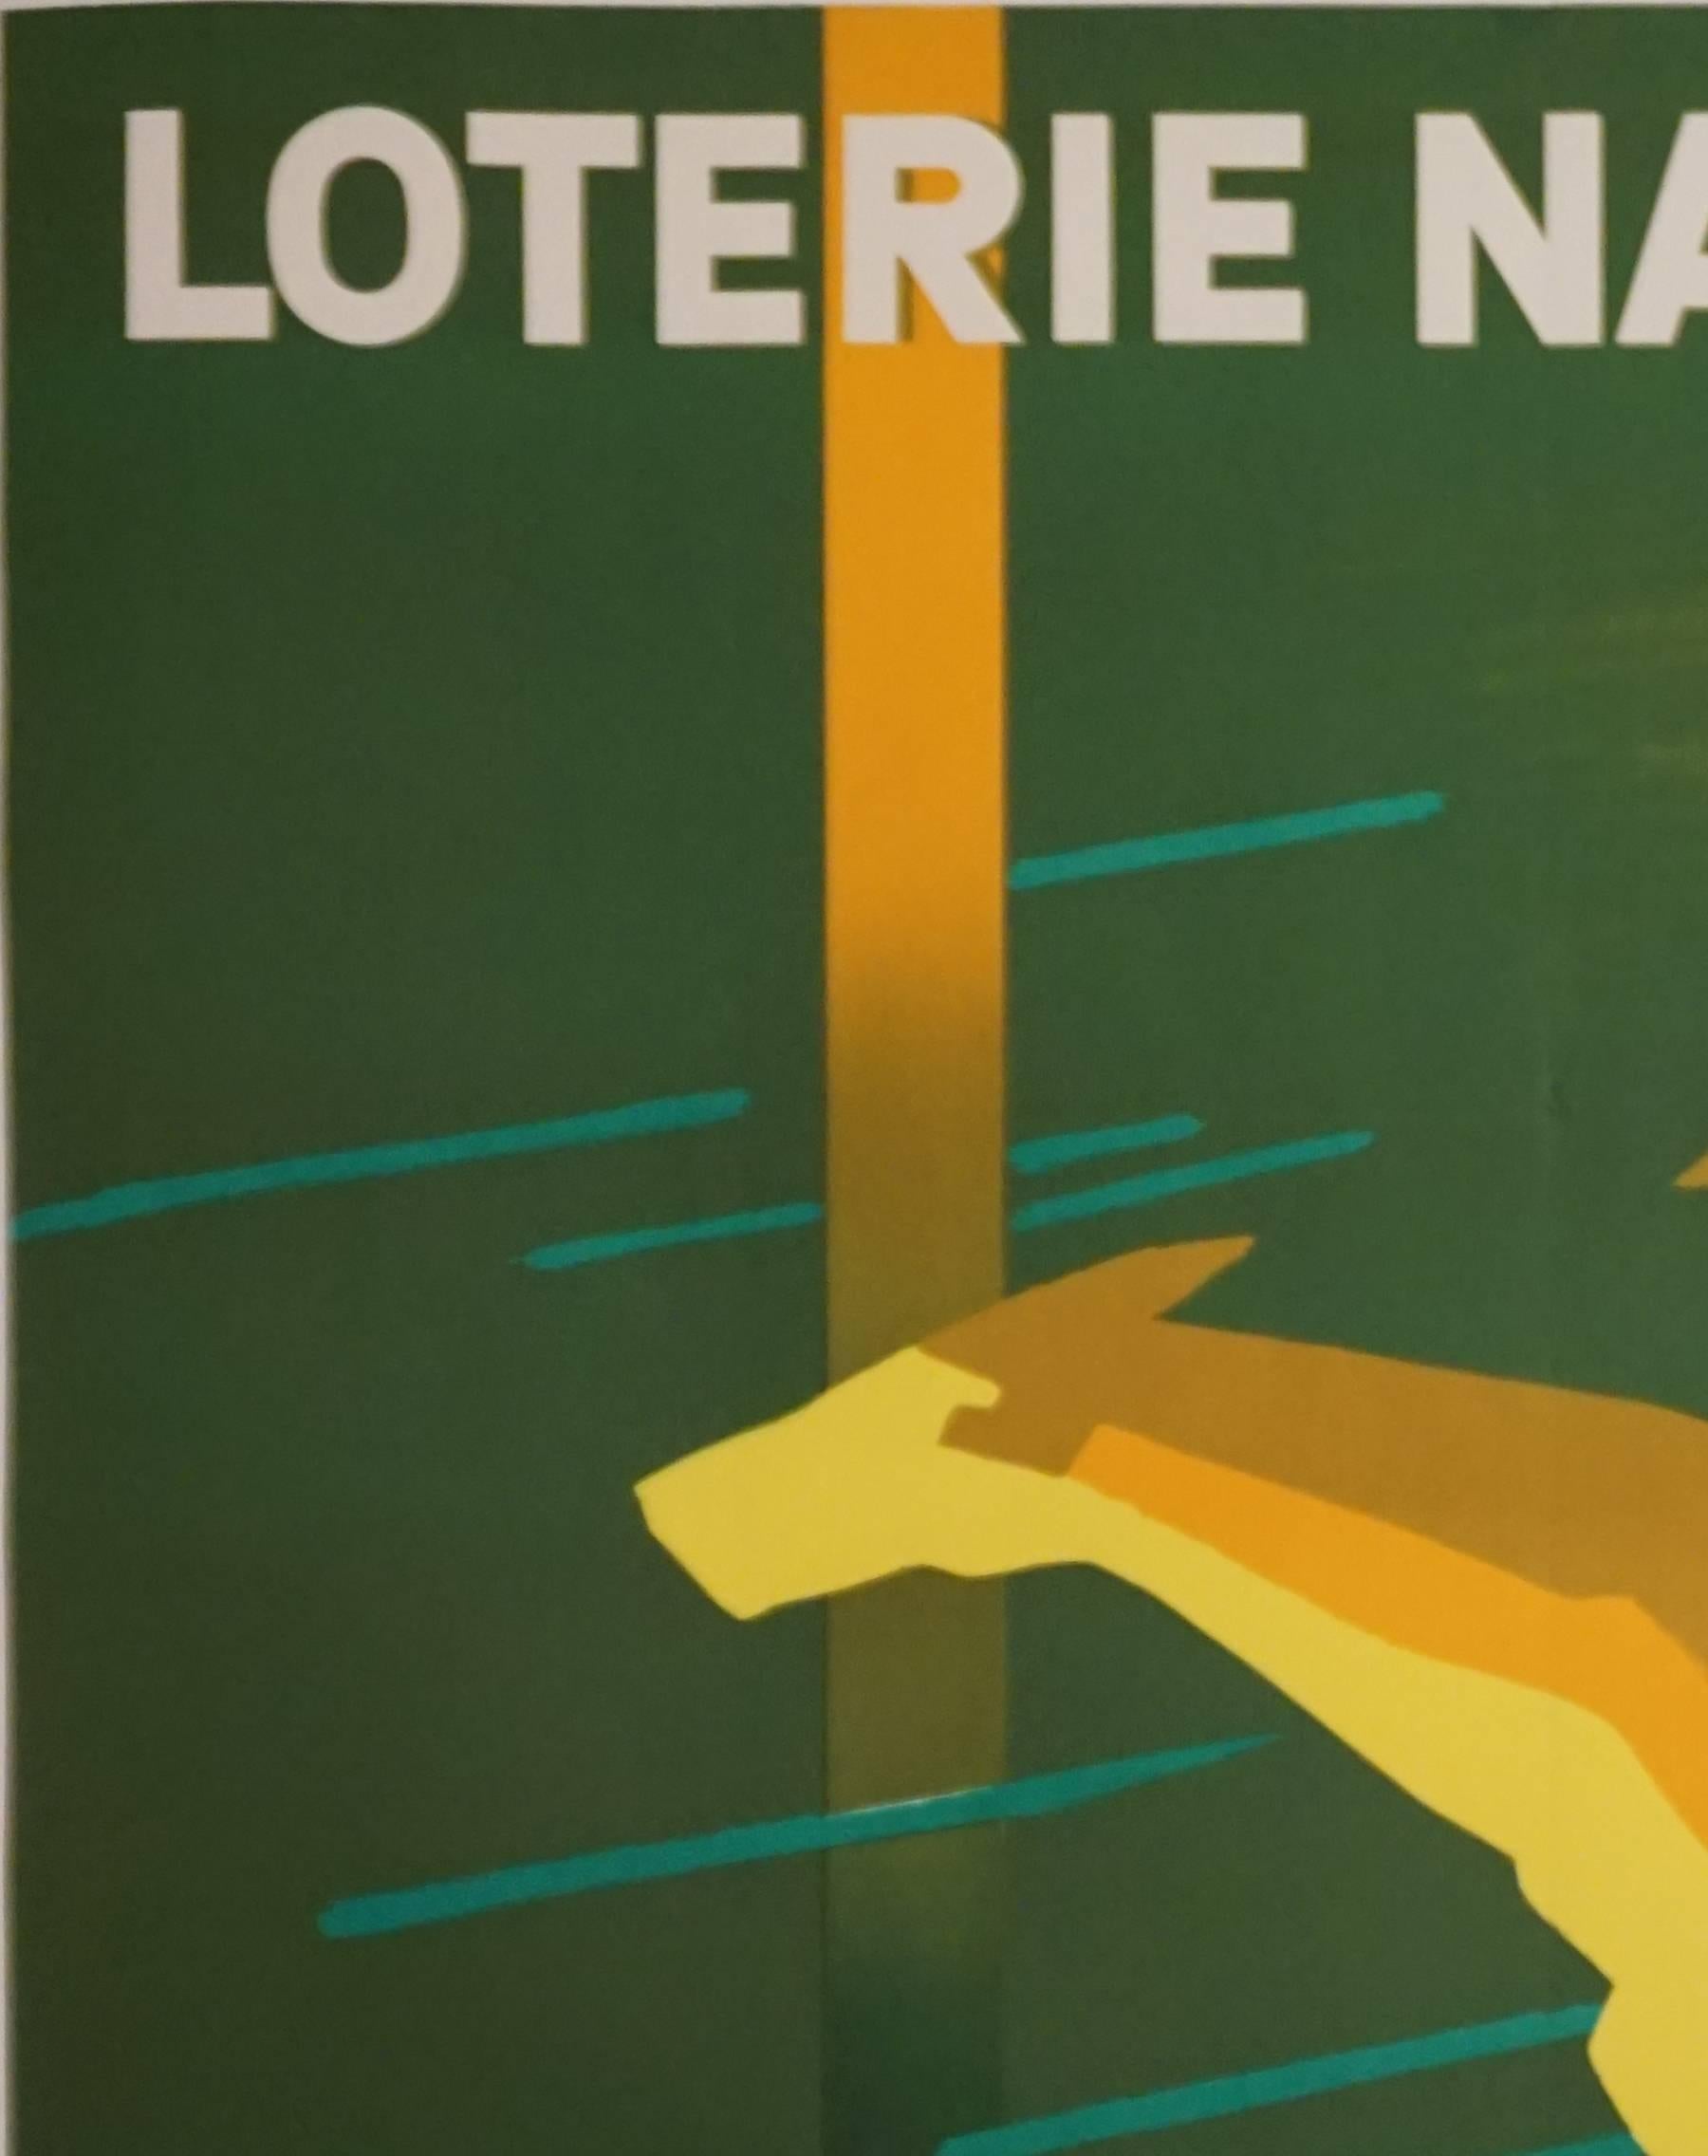 This is a French Mid-Century Modern period advertising poster for Loterie Nationale Grand Prix de Paris by Paul Colin. This magnificently designed poster features the abstract Silhouette of a horse and its jockey emerging from the right side of the